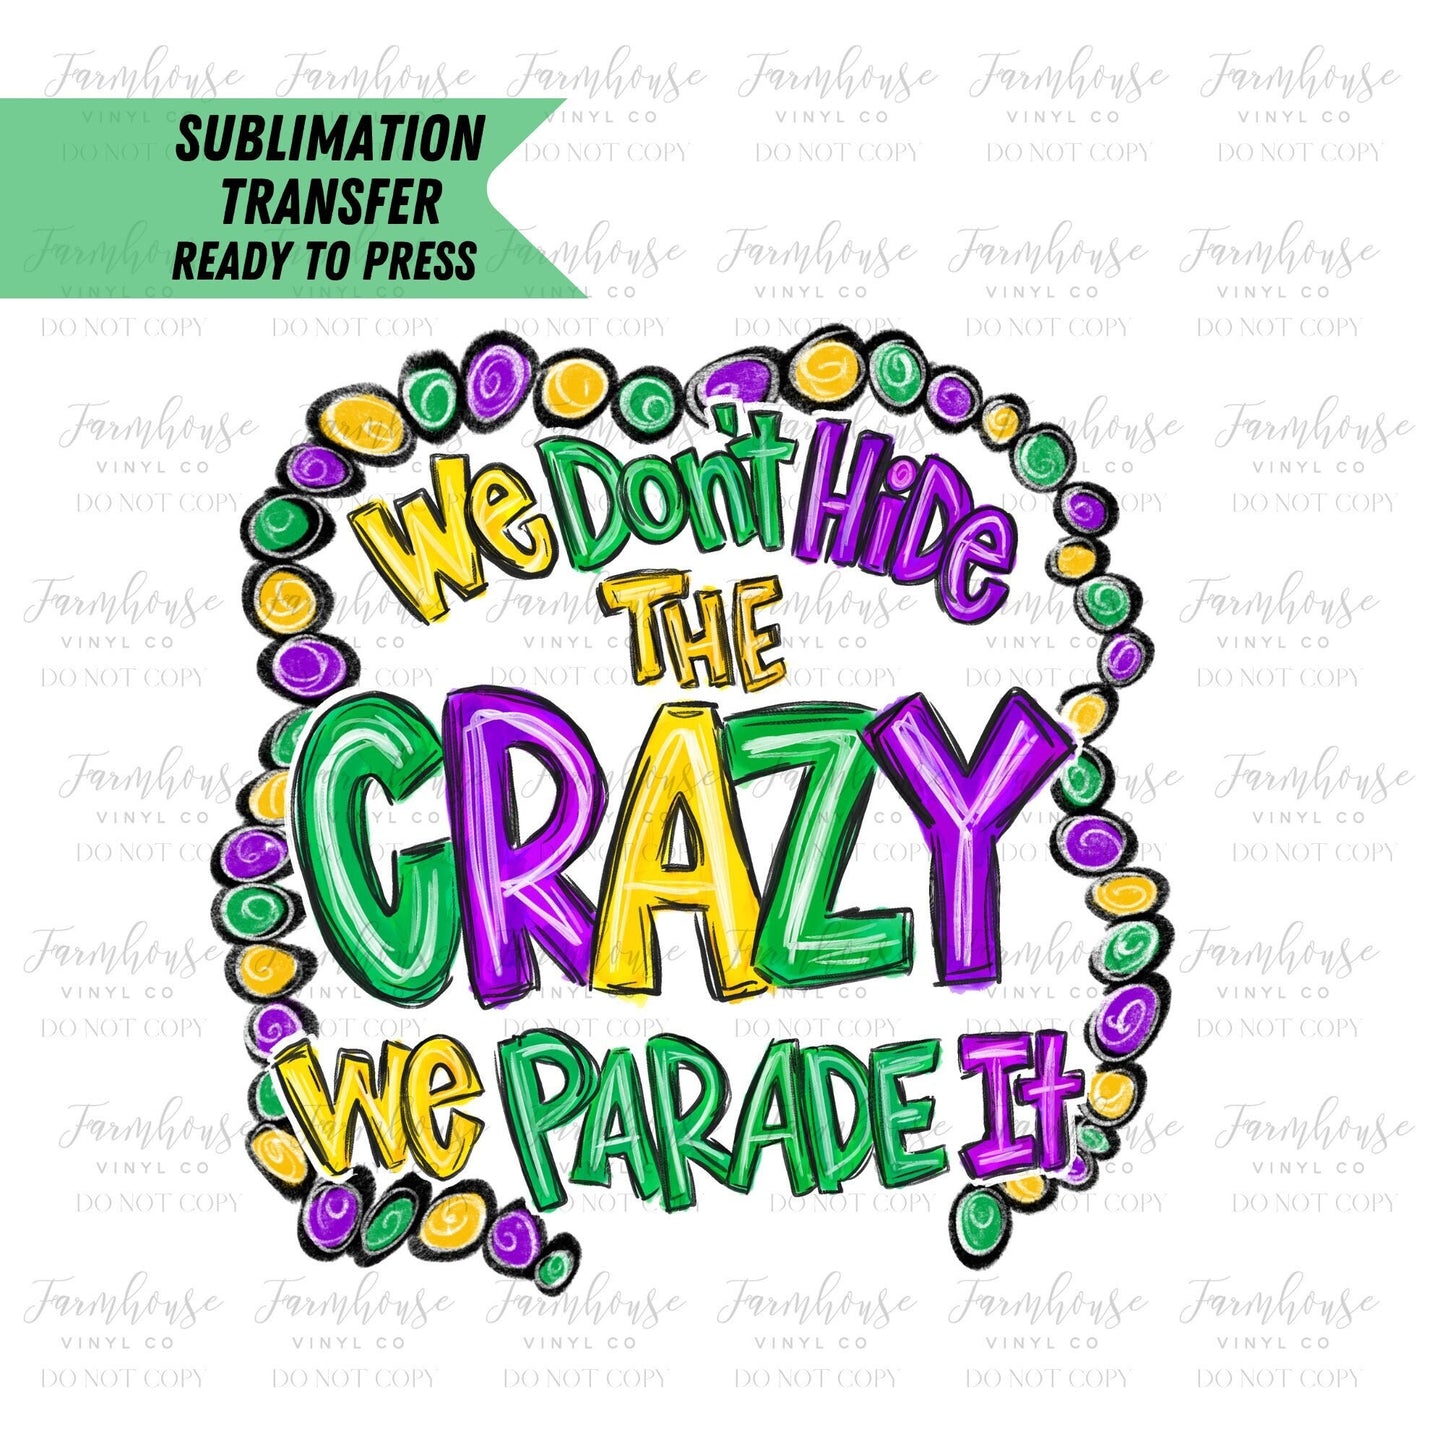 Mardi Gras We Don’t Hide the Crazy Parade, Ready To Press, Sublimation Transfers, Sublimation, Transfer Ready To Press, Heat Transfer Design - Farmhouse Vinyl Co